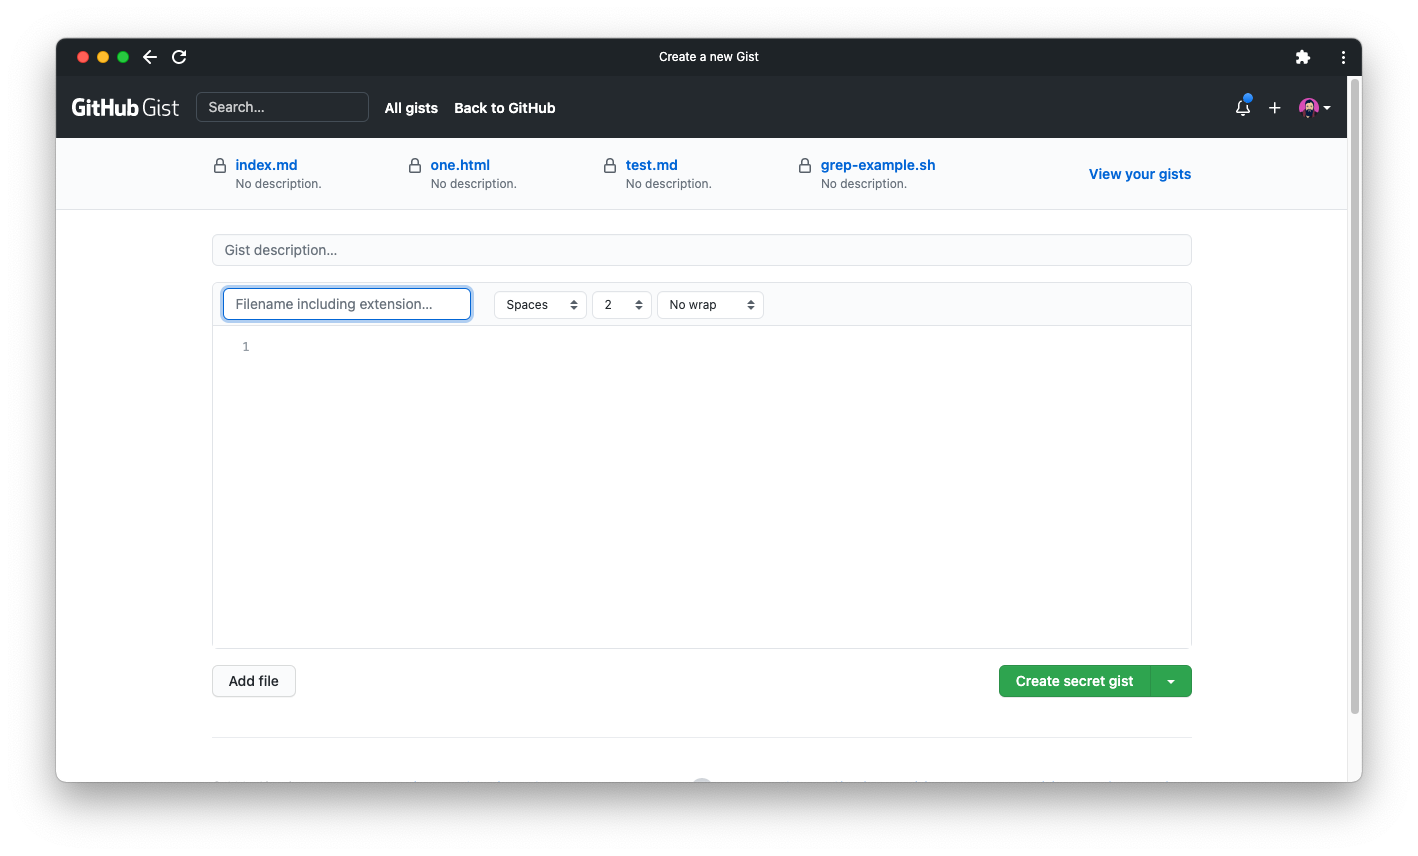 A screenshot of the main GitHub Gist page with a form for creating a new gist